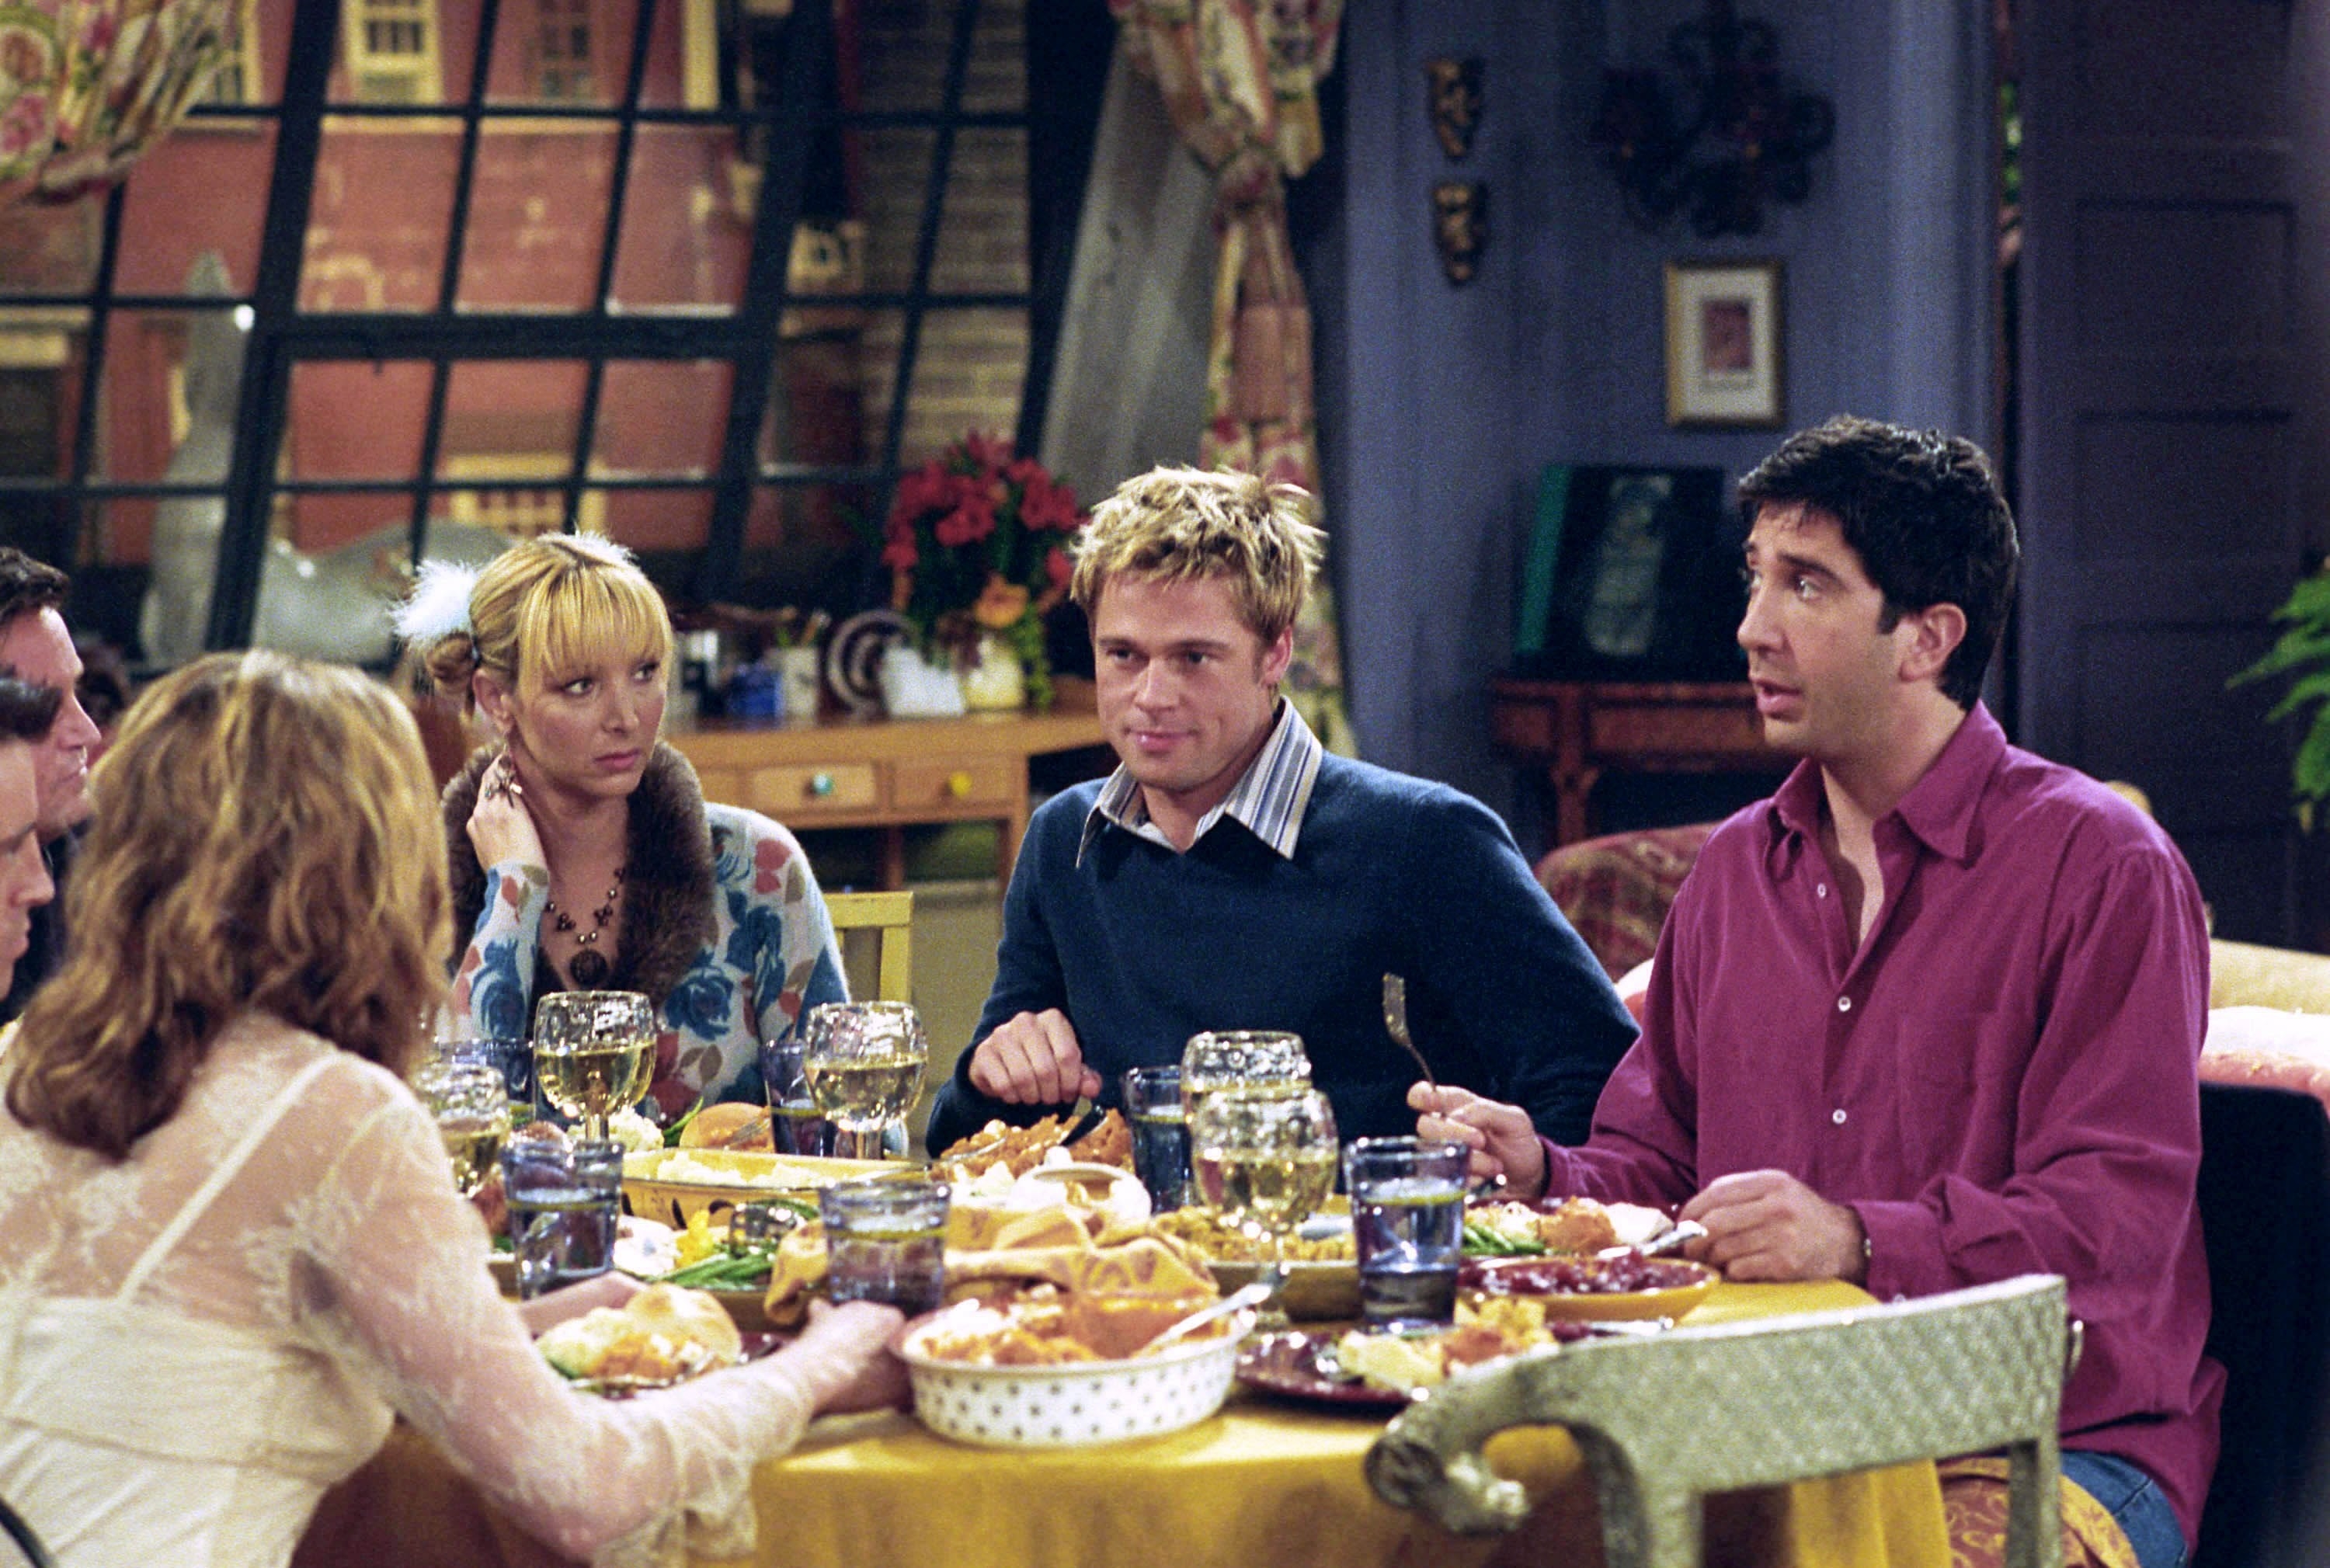 Jennifer Aniston as Rachel, Lisa Kudrow as Phoebe, Brad Pitt as Will, and David Schwimmer as Ross act in a scene from the &quot;Friends&quot; episode, &quot;The One With The Rumor&quot;